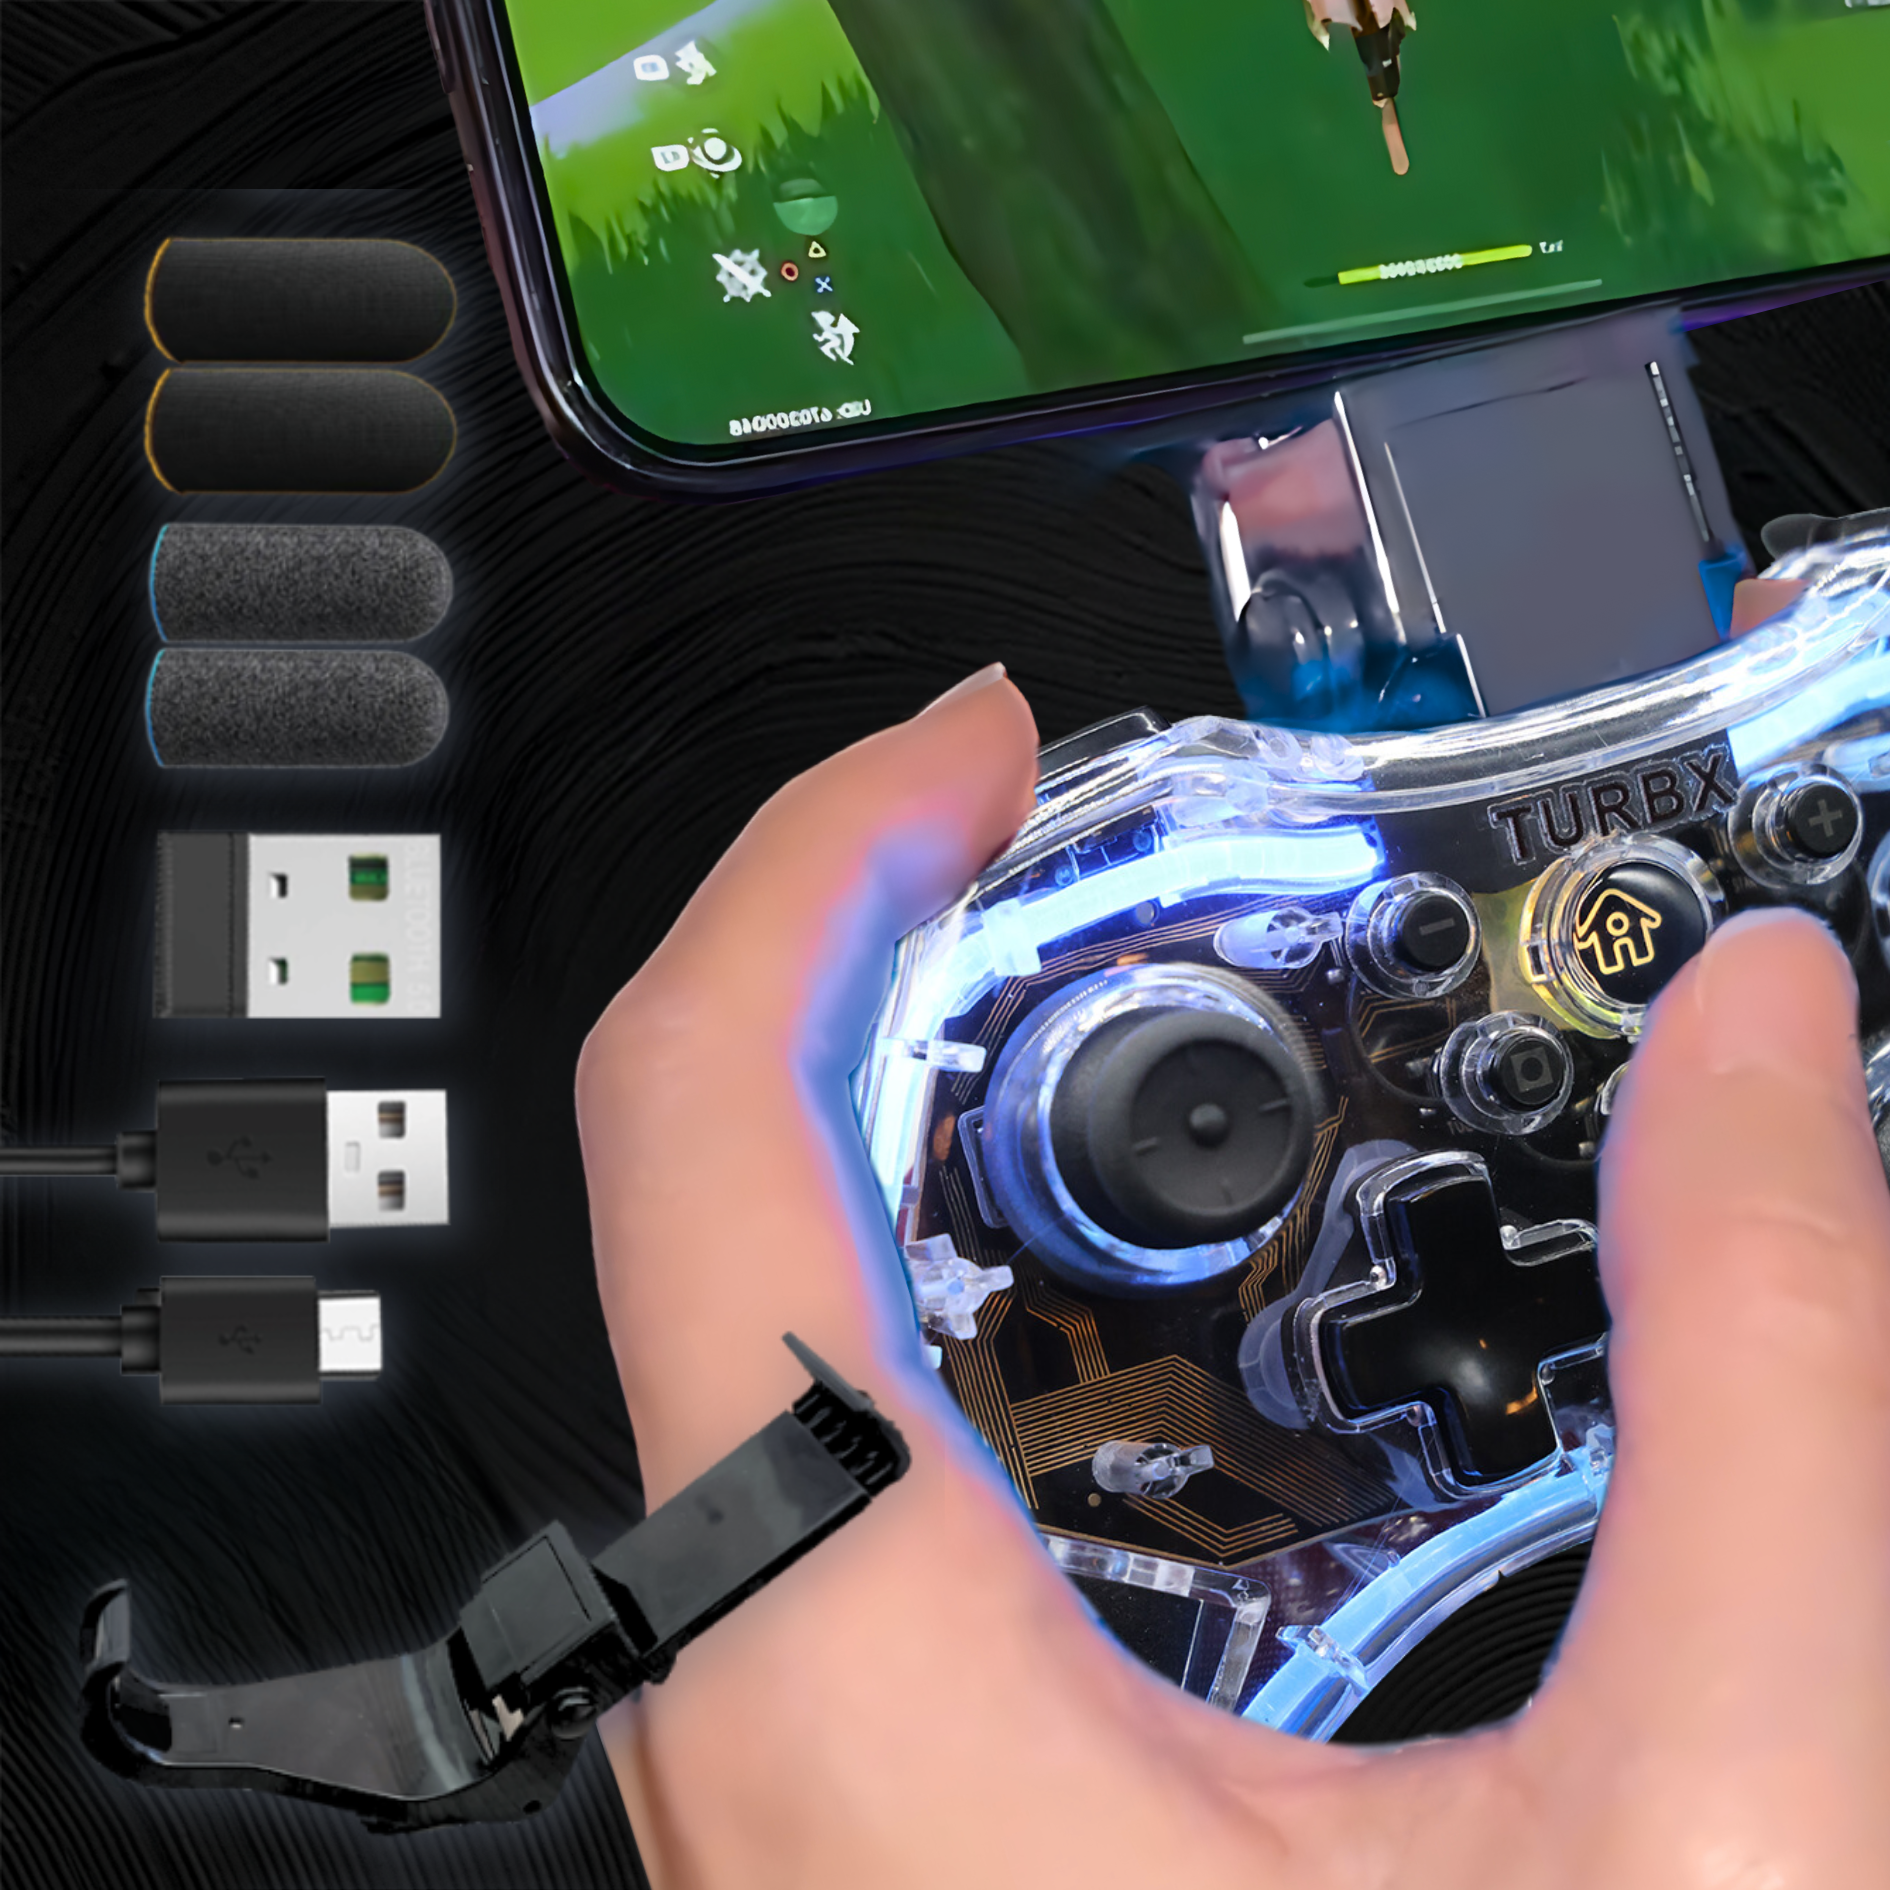 Turbx gaming controllers and gamepads displayed on a dynamic Cross-platform Video gaming setup, highlighting portability and LED RGB, Polarized chrome color style for cloud gaming enthusiasts & mobile gamers. Turbx is the go-to game store for gamers seeking stylish, portable, and immersive compact gaming accessories & organizers.